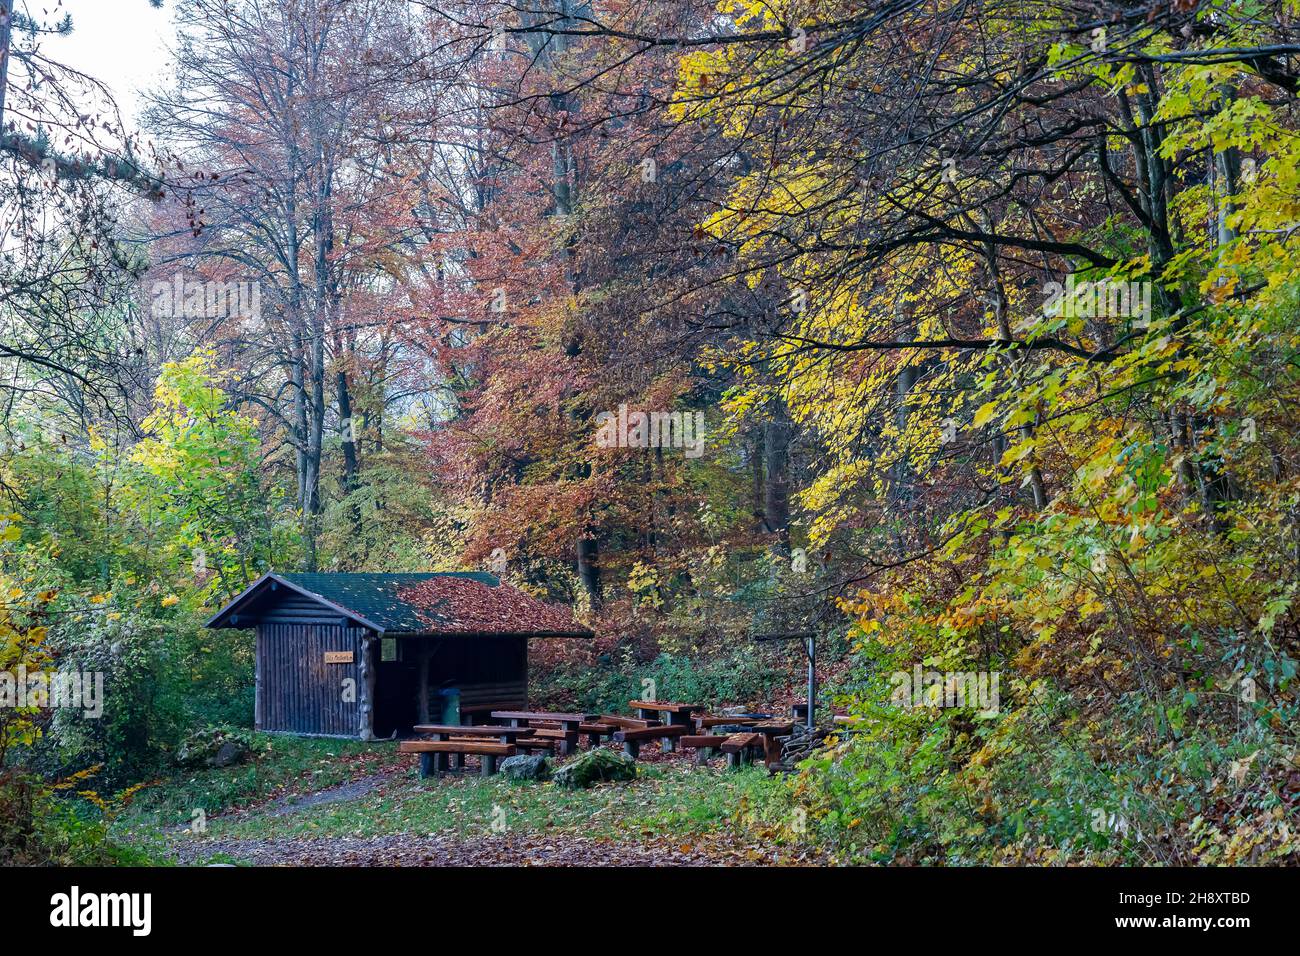 Wooden hut with benches in the forest Stock Photo